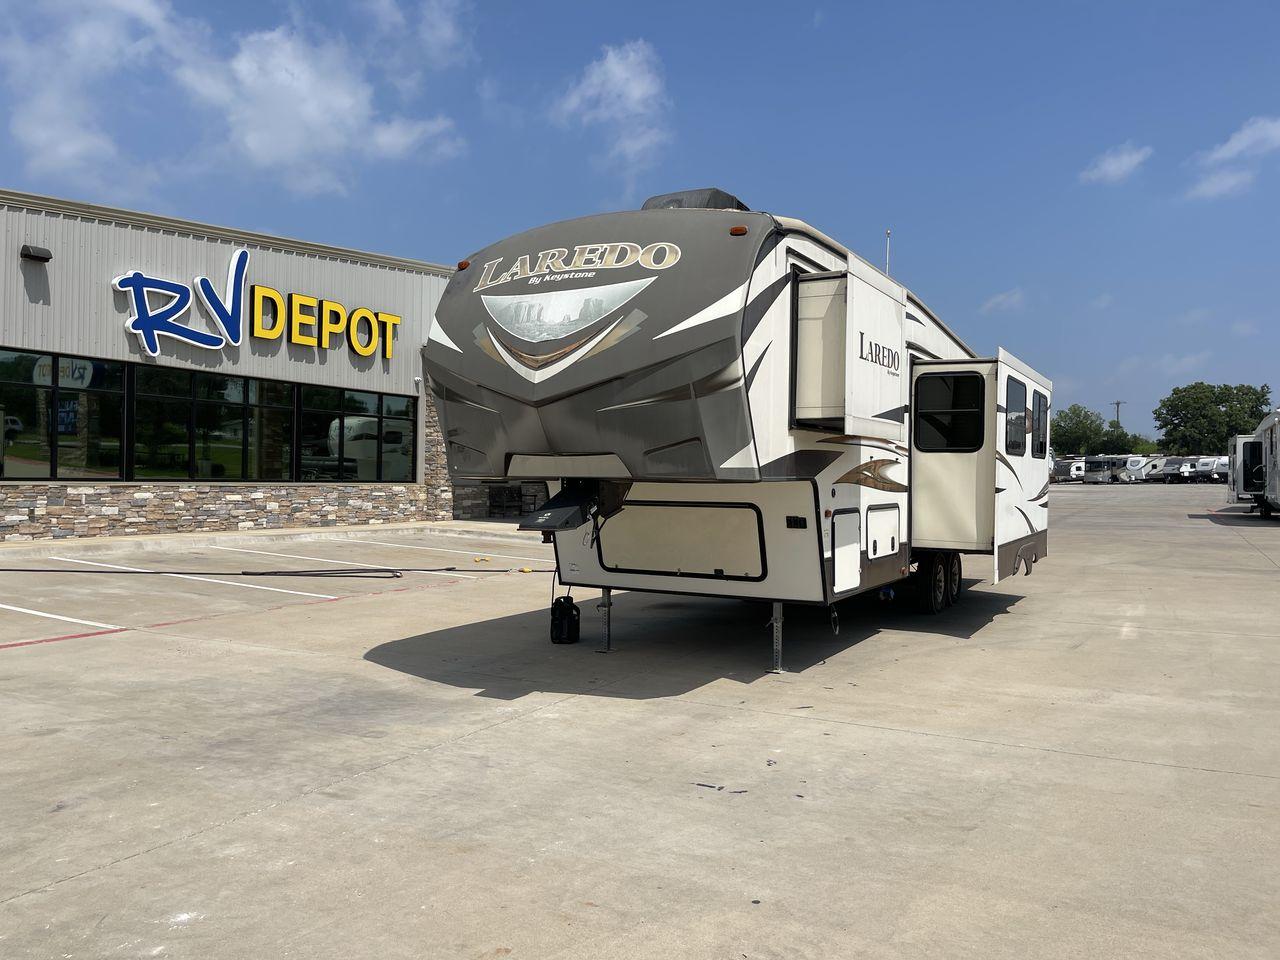 2015 WHITE KEYSTONE LAREDO 285SBH (4YDF28522FK) , Length: 33 ft. | Dry Weight: 7,880 lbs. | Gross Weight: 9,580 lbs. | Slides: 1 transmission, located at 4319 N Main Street, Cleburne, TX, 76033, (817) 221-0660, 32.435829, -97.384178 - This 2015 Keystone Fifth Wheel measures 33 feet long and 8 feet wide with a dry weight of 7,880 lbs. It has a GVWR of 9,580 lbs and a hitch weight of 1,465 lbs. This model also comes with automatic heating and cooling rated at 30,000 and 13,500 BTUs respectively. The exterior of this unit is a base - Photo #0